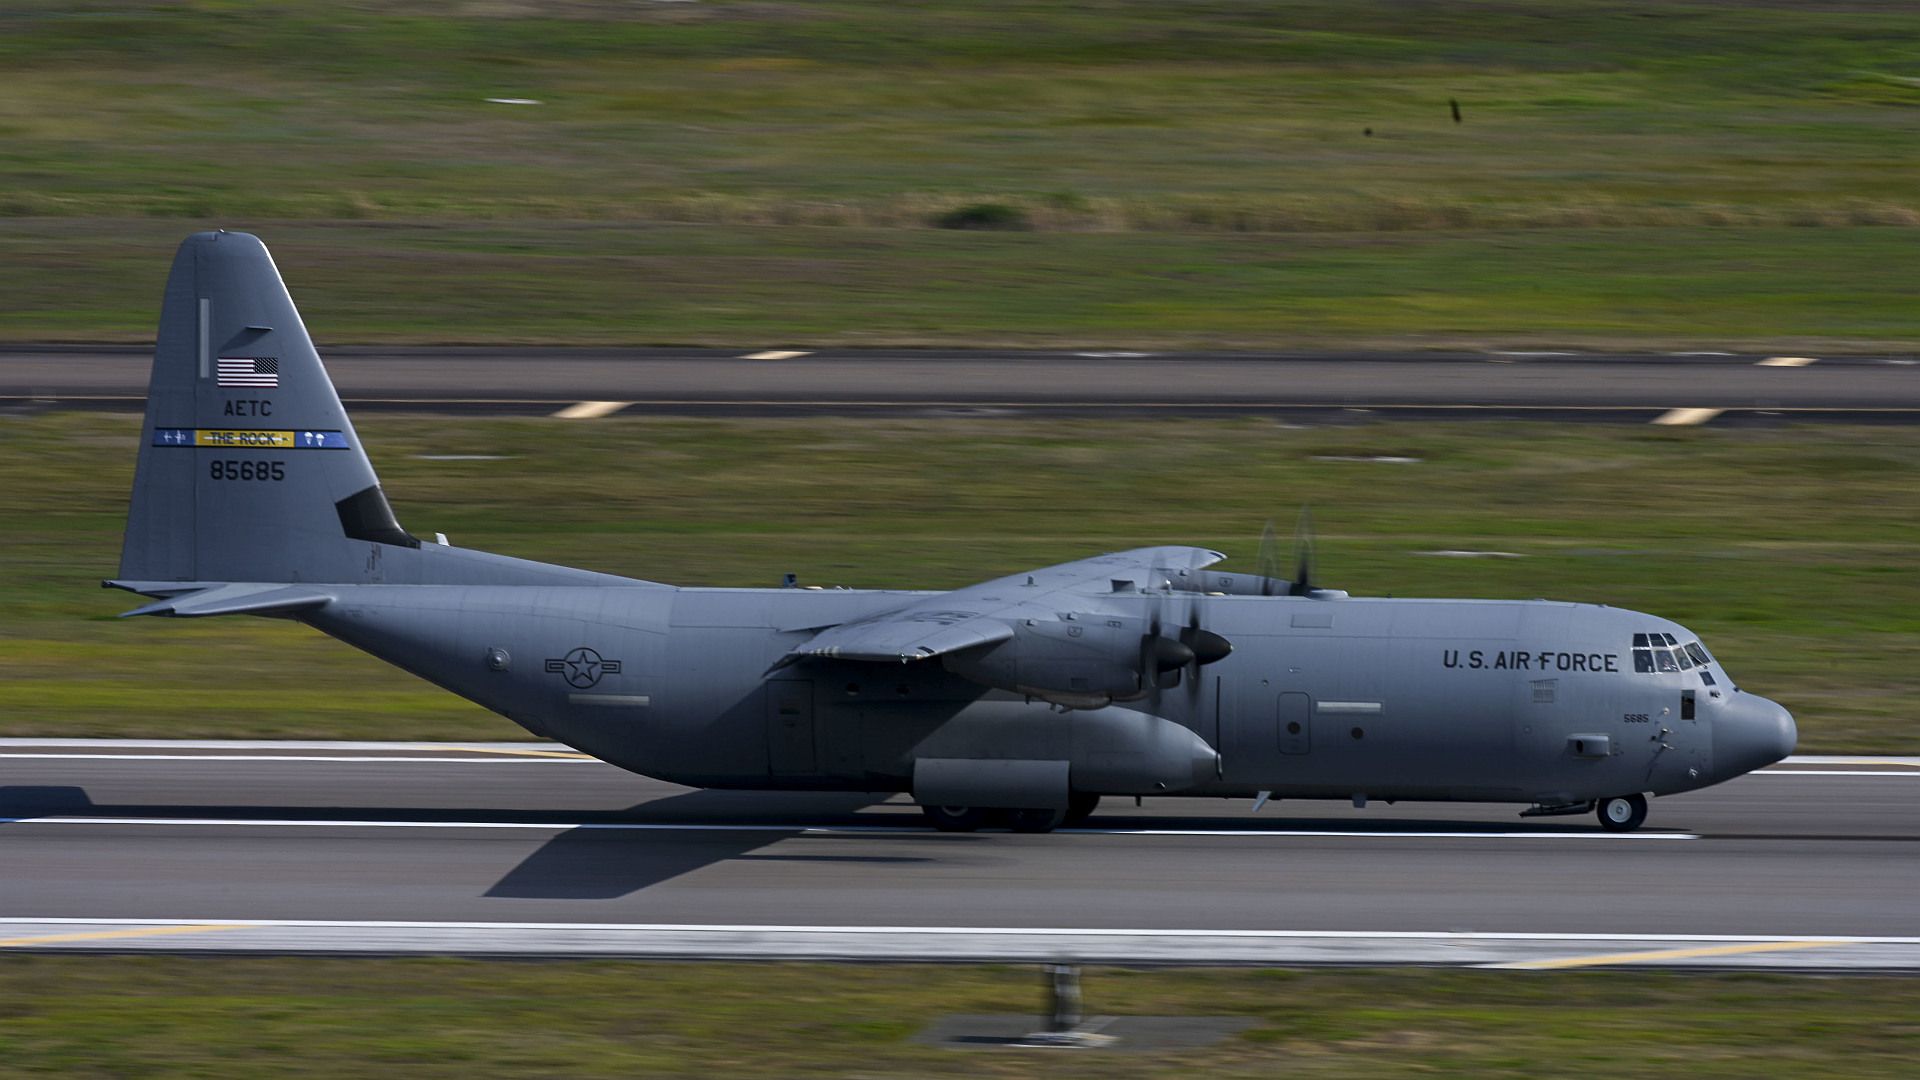 130J Super Hercules Assigned To The 19th Airlift Wing Little Rock Air Force Base Arkansas Lands